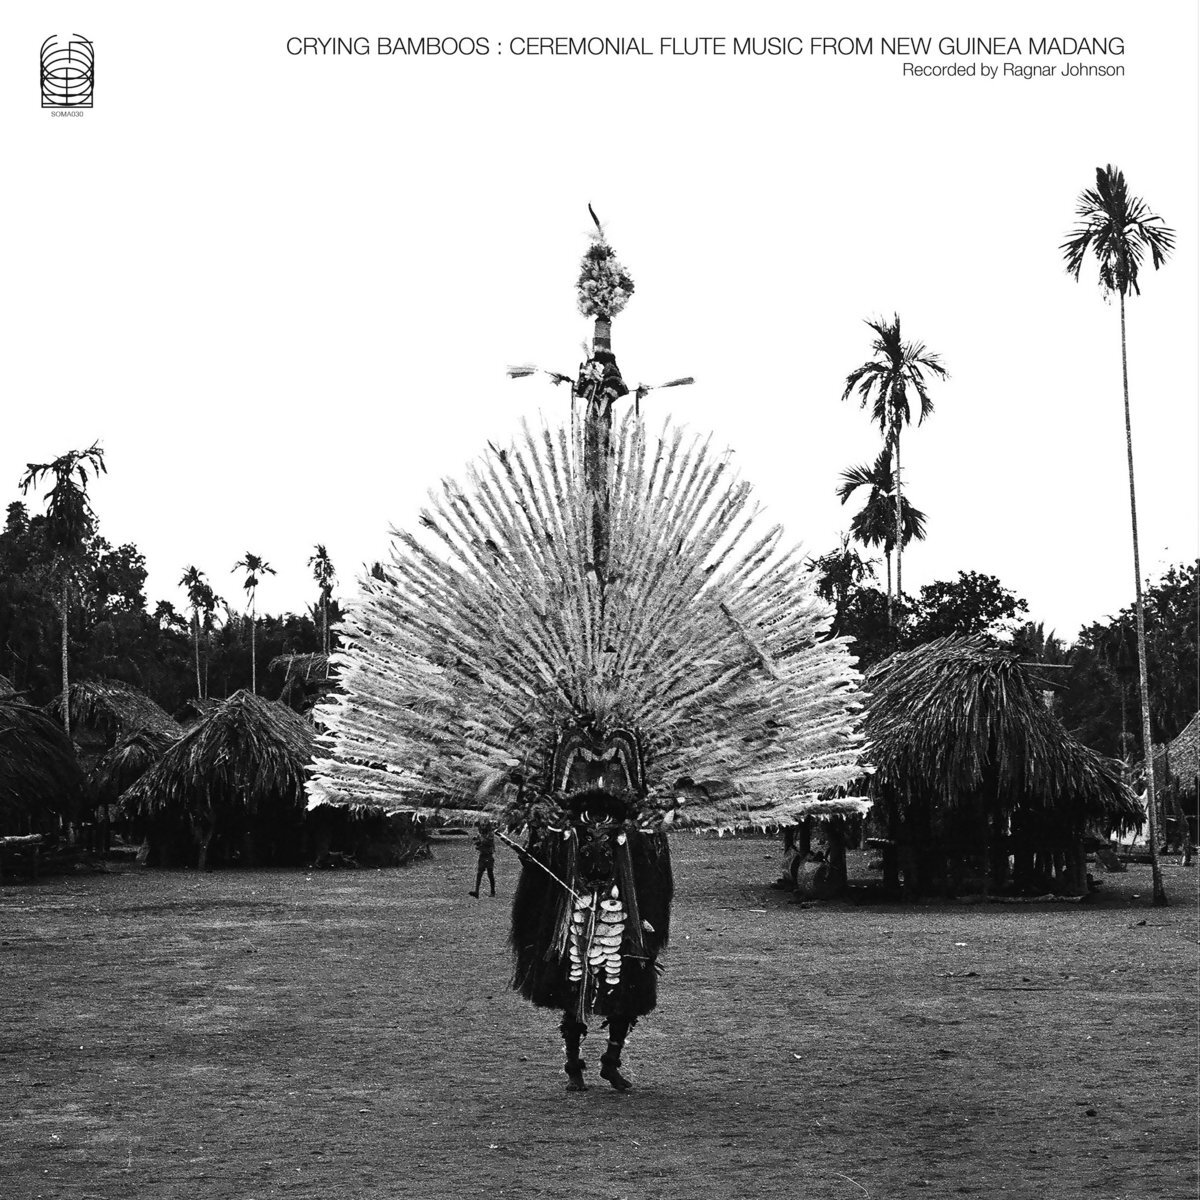 Crying Bamboos: Ceremonial Flute Music from New Guinea: Madang - RAGNAR JOHNSON